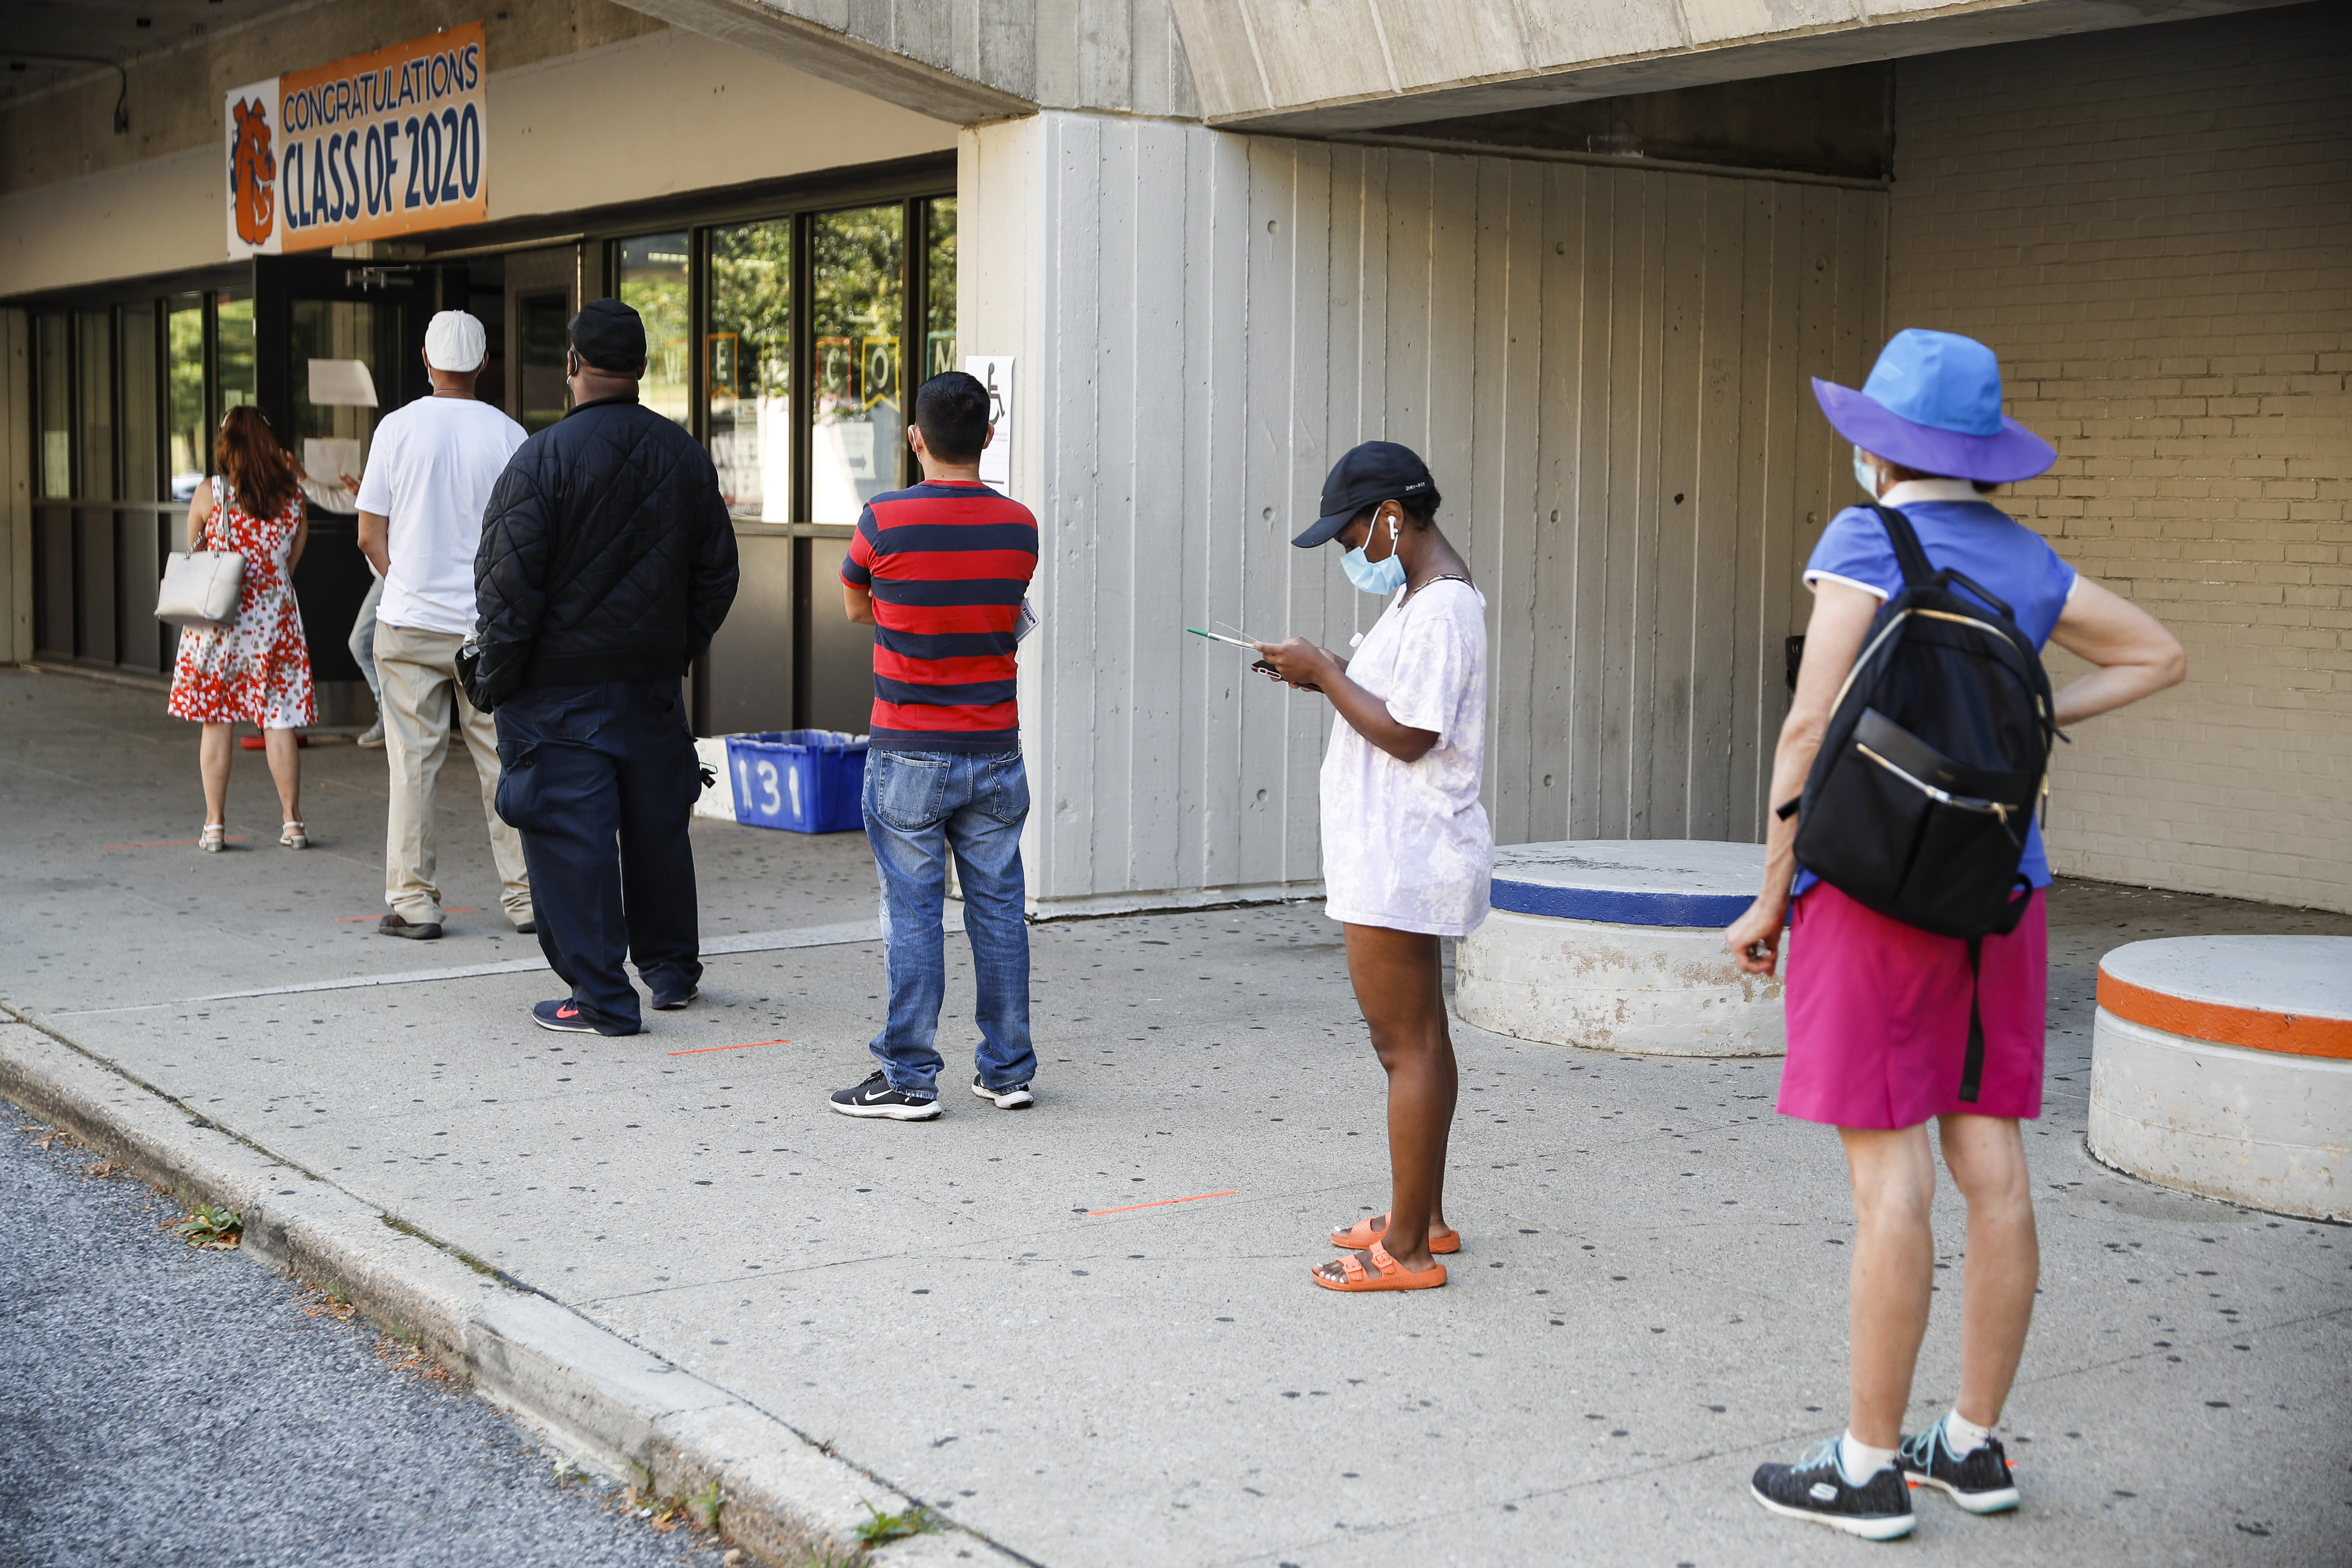 Voters wait in line to cast their ballots in New York's primary election at a polling station inside Yonkers Middle/High School, Tuesday, June 23, 2020, in Yonkers, N.Y. (AP Photo/John Minchillo)